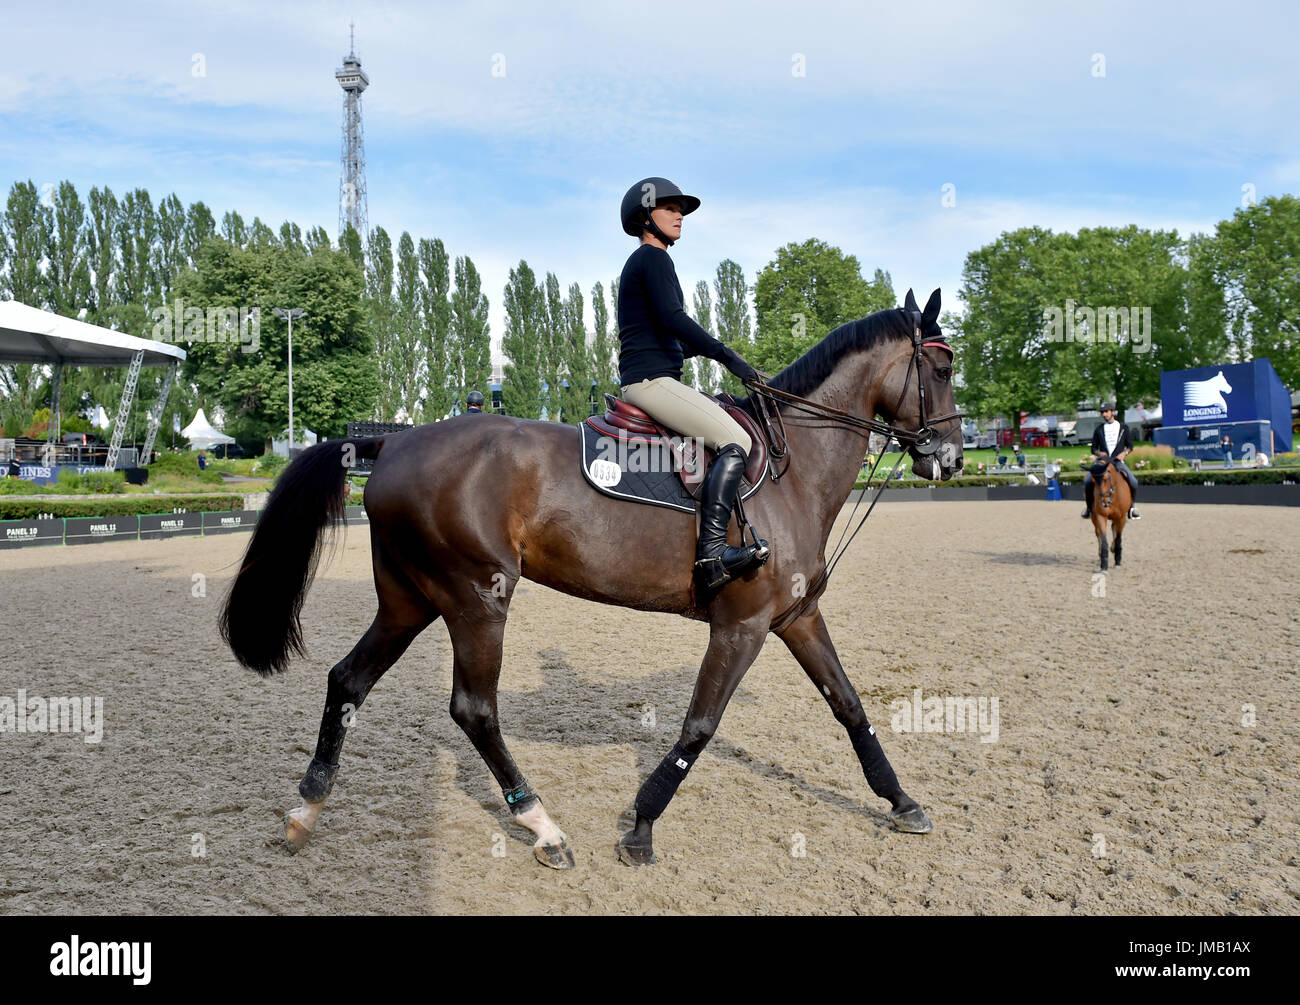 Berlin, Germany. 27th July, 2017. Georgina Bloomberg training on her horse  Calista during the warm-up for the Global Champions Tour in Berlin,  Germany, 27 July 2017. The show jumping is to take